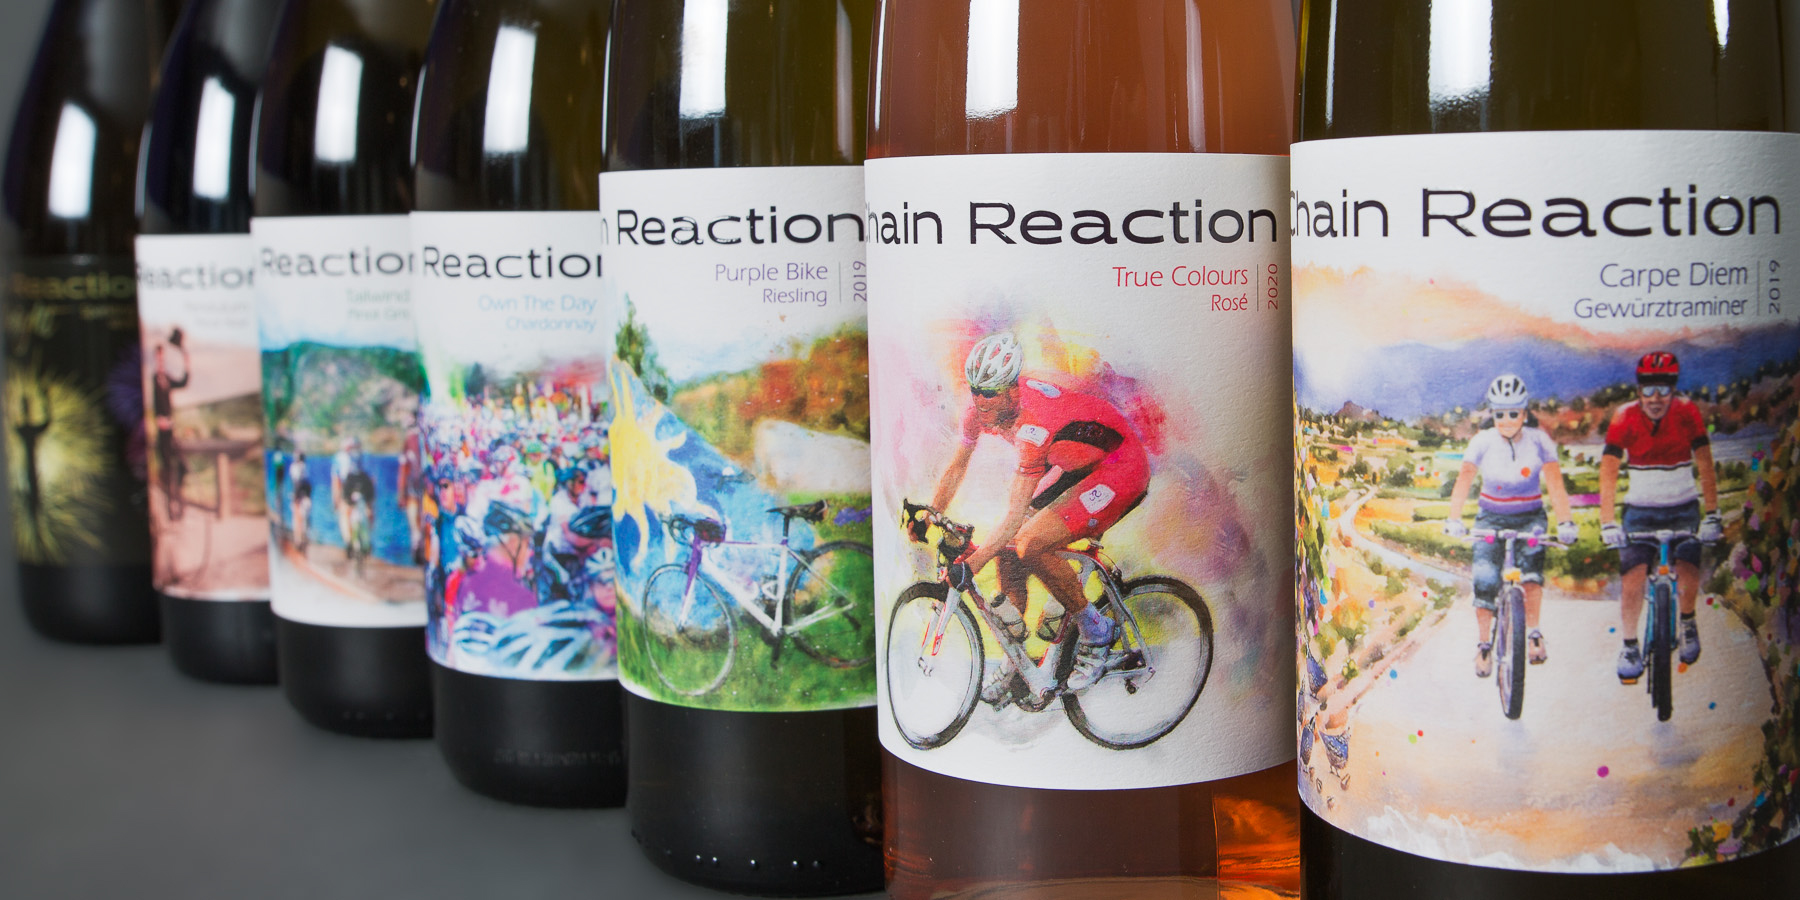 Chain Reaction Winery